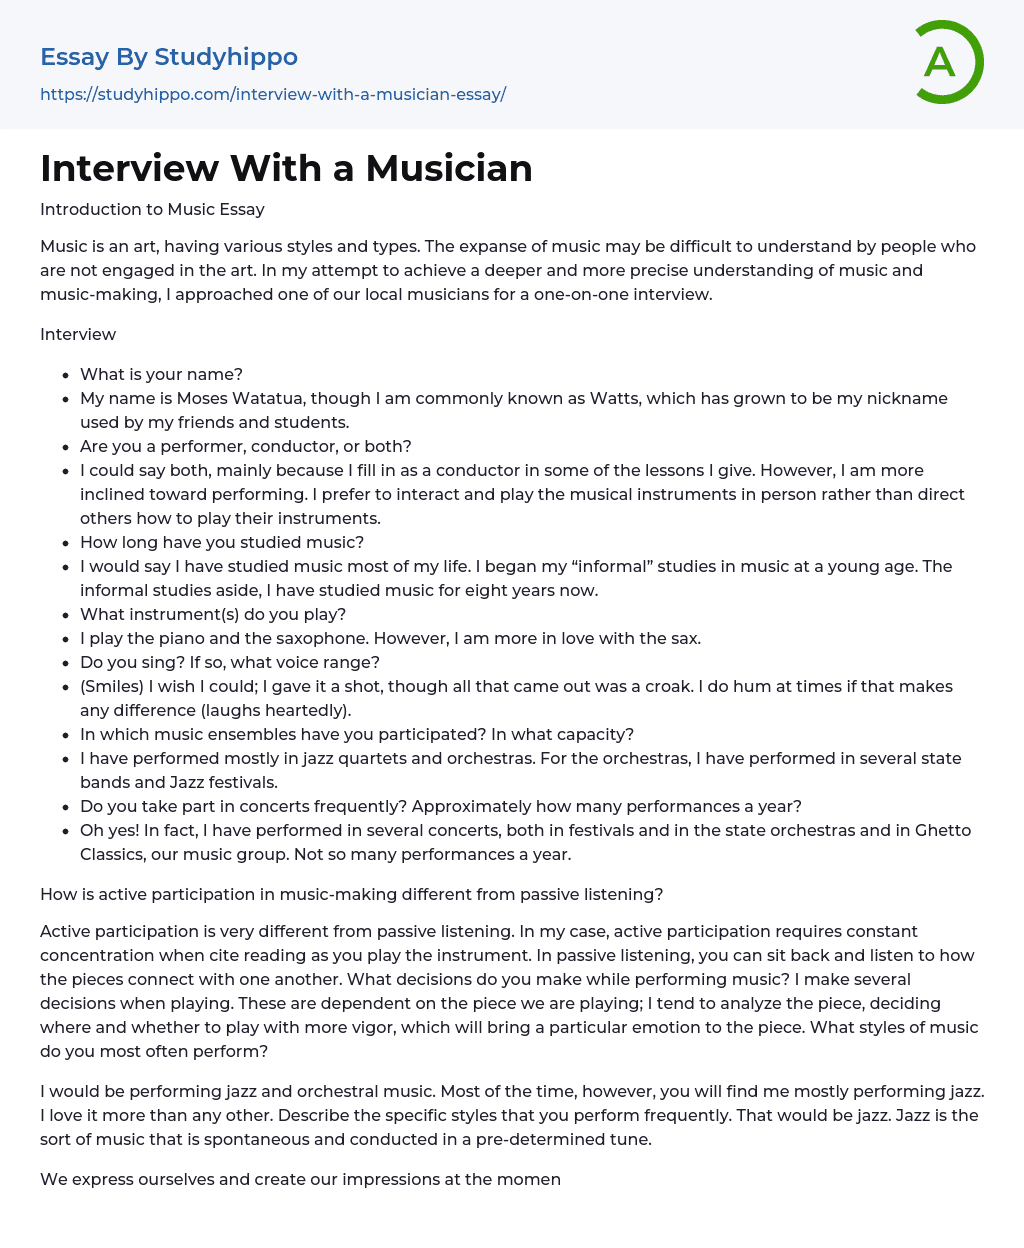 Interview With a Musician Essay Example